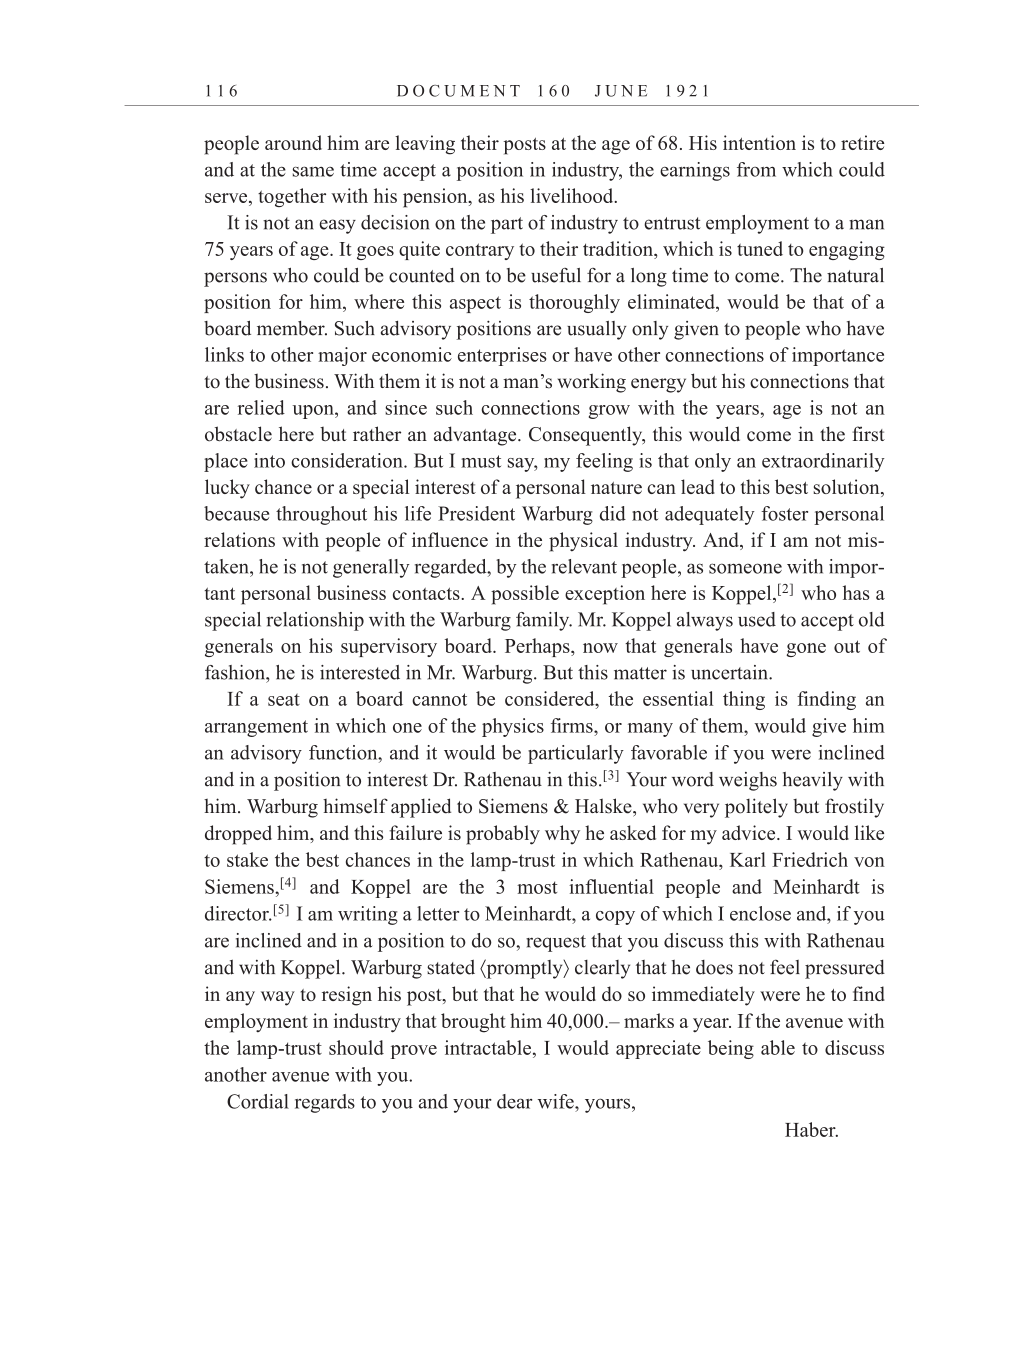 Volume 12: The Berlin Years: Correspondence, January-December 1921 (English translation supplement) page 116